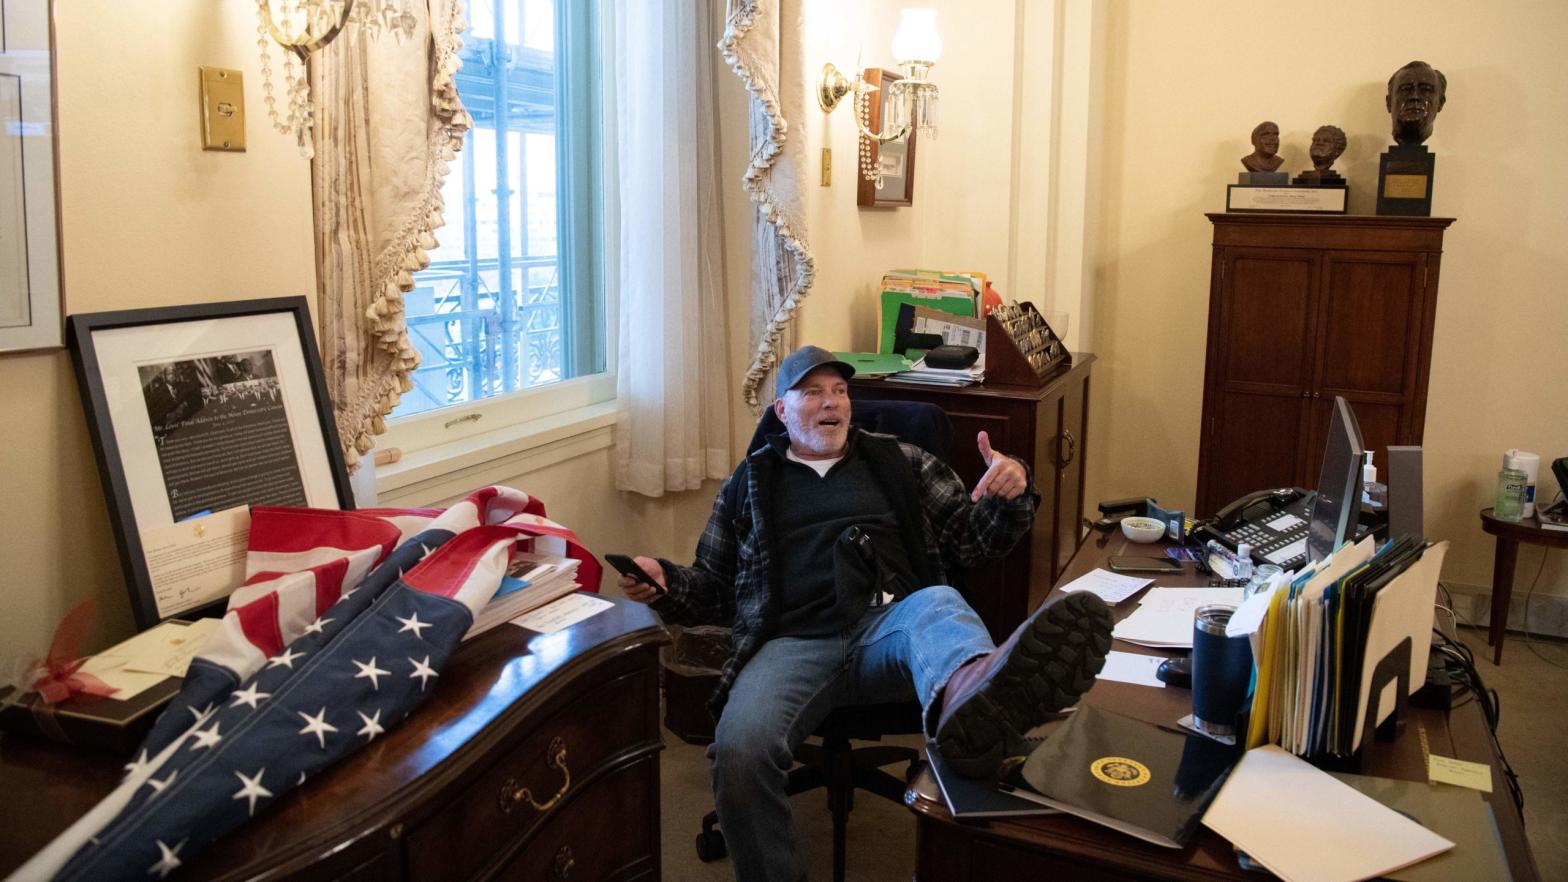 Richard Barnett, a supporter of U.S. President Donald Trump sits inside the office of US Speaker of the House Nancy Pelosi after breaking into the Capitol building with other violent insurgents on January 6, 2021. (Photo: Saul Loeb, Getty Images)